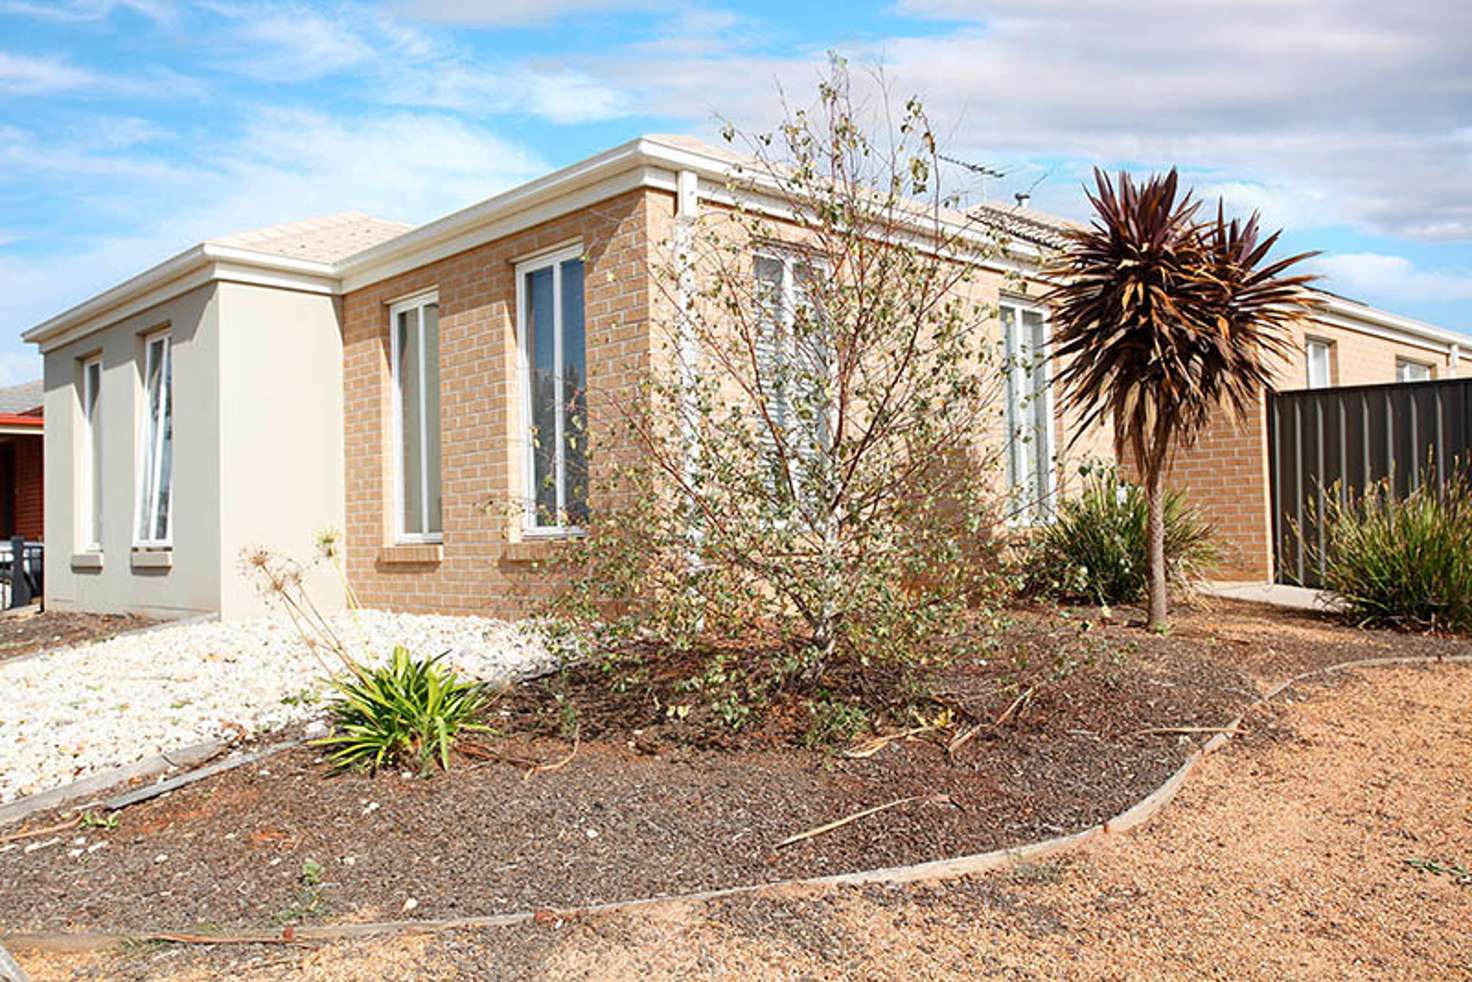 Main view of Homely house listing, 19 Mallina Glen, Tarneit VIC 3029